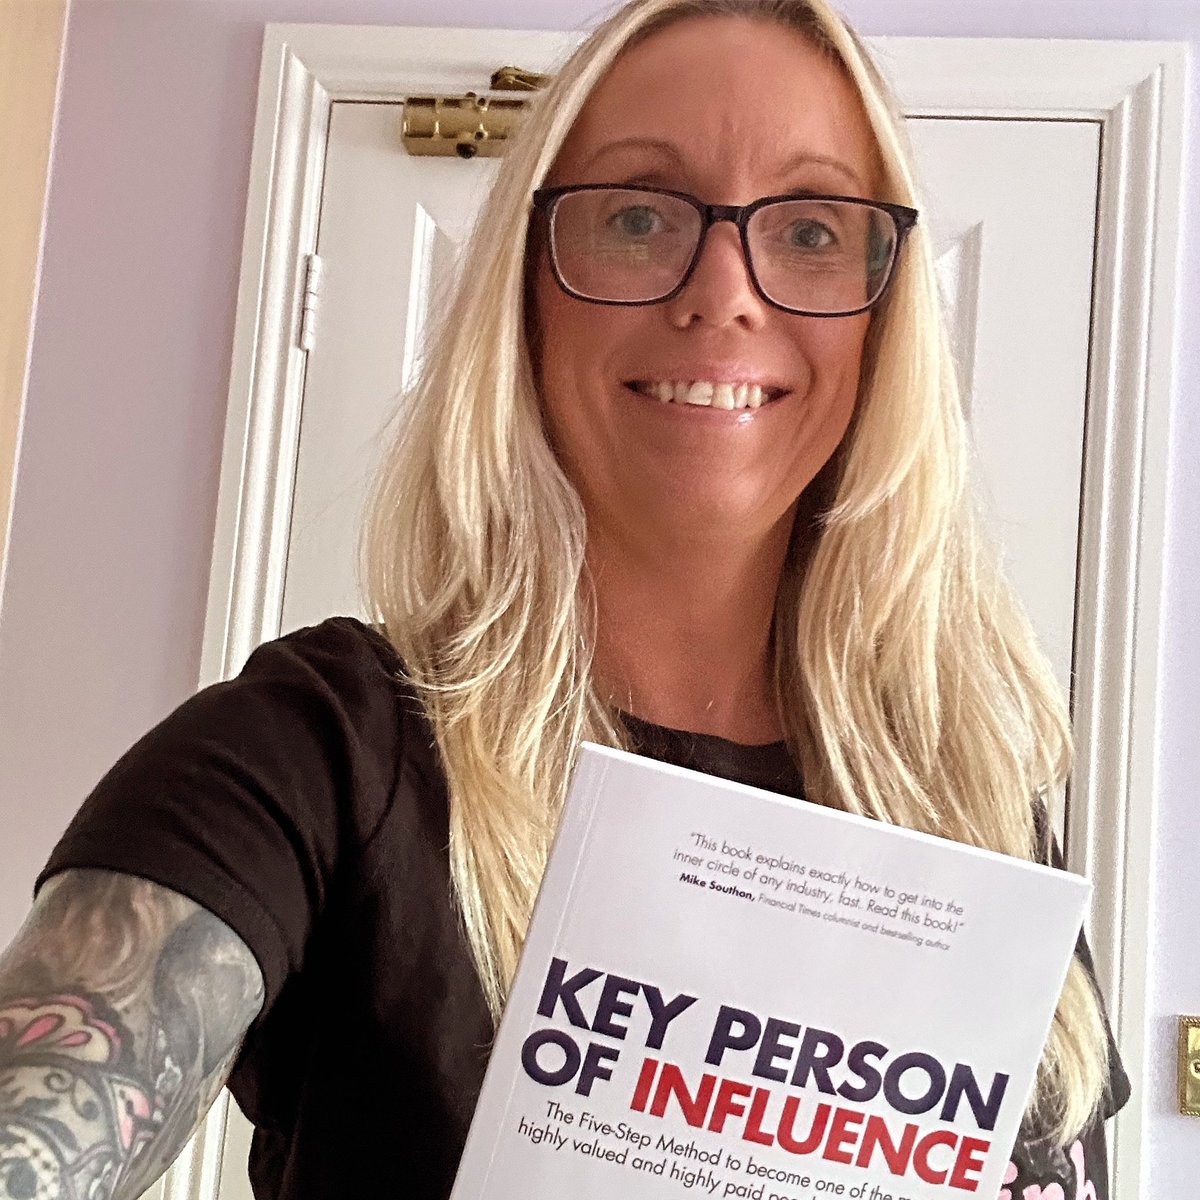 Thanks for the new book Ry @TheRGHGroup looking forward to reading it “Key Person of Influence” @DanielPriestley 💜🙌💜 

#keypersonofinfluence #danielpriestley #innercircle #newread